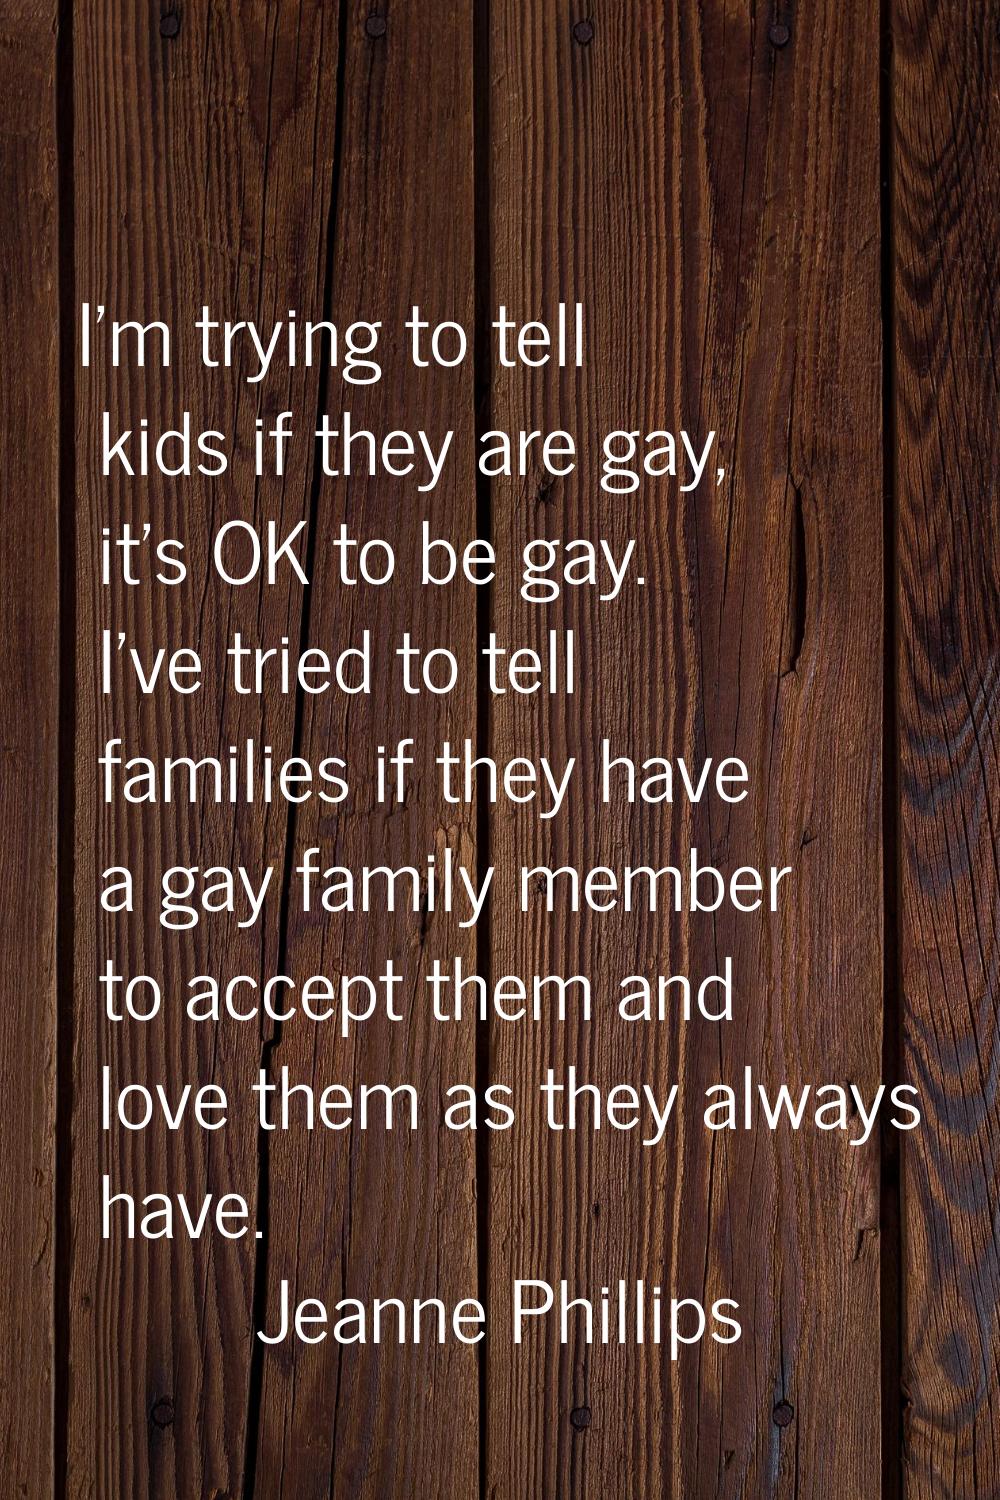 I'm trying to tell kids if they are gay, it's OK to be gay. I've tried to tell families if they hav